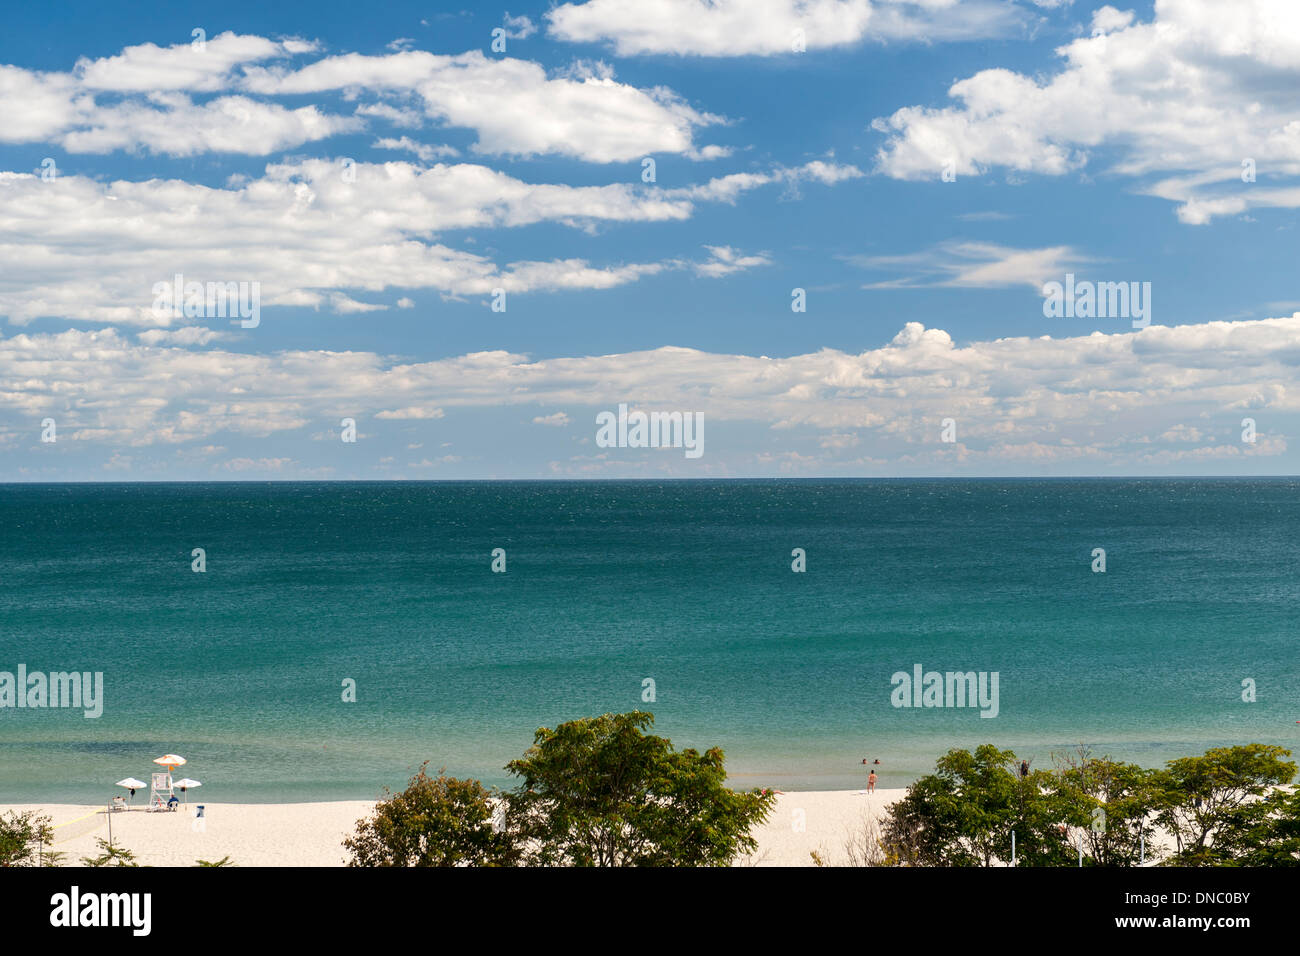 The Black Sea coast of Varna, the third largest city in Bulgaria. Stock Photo